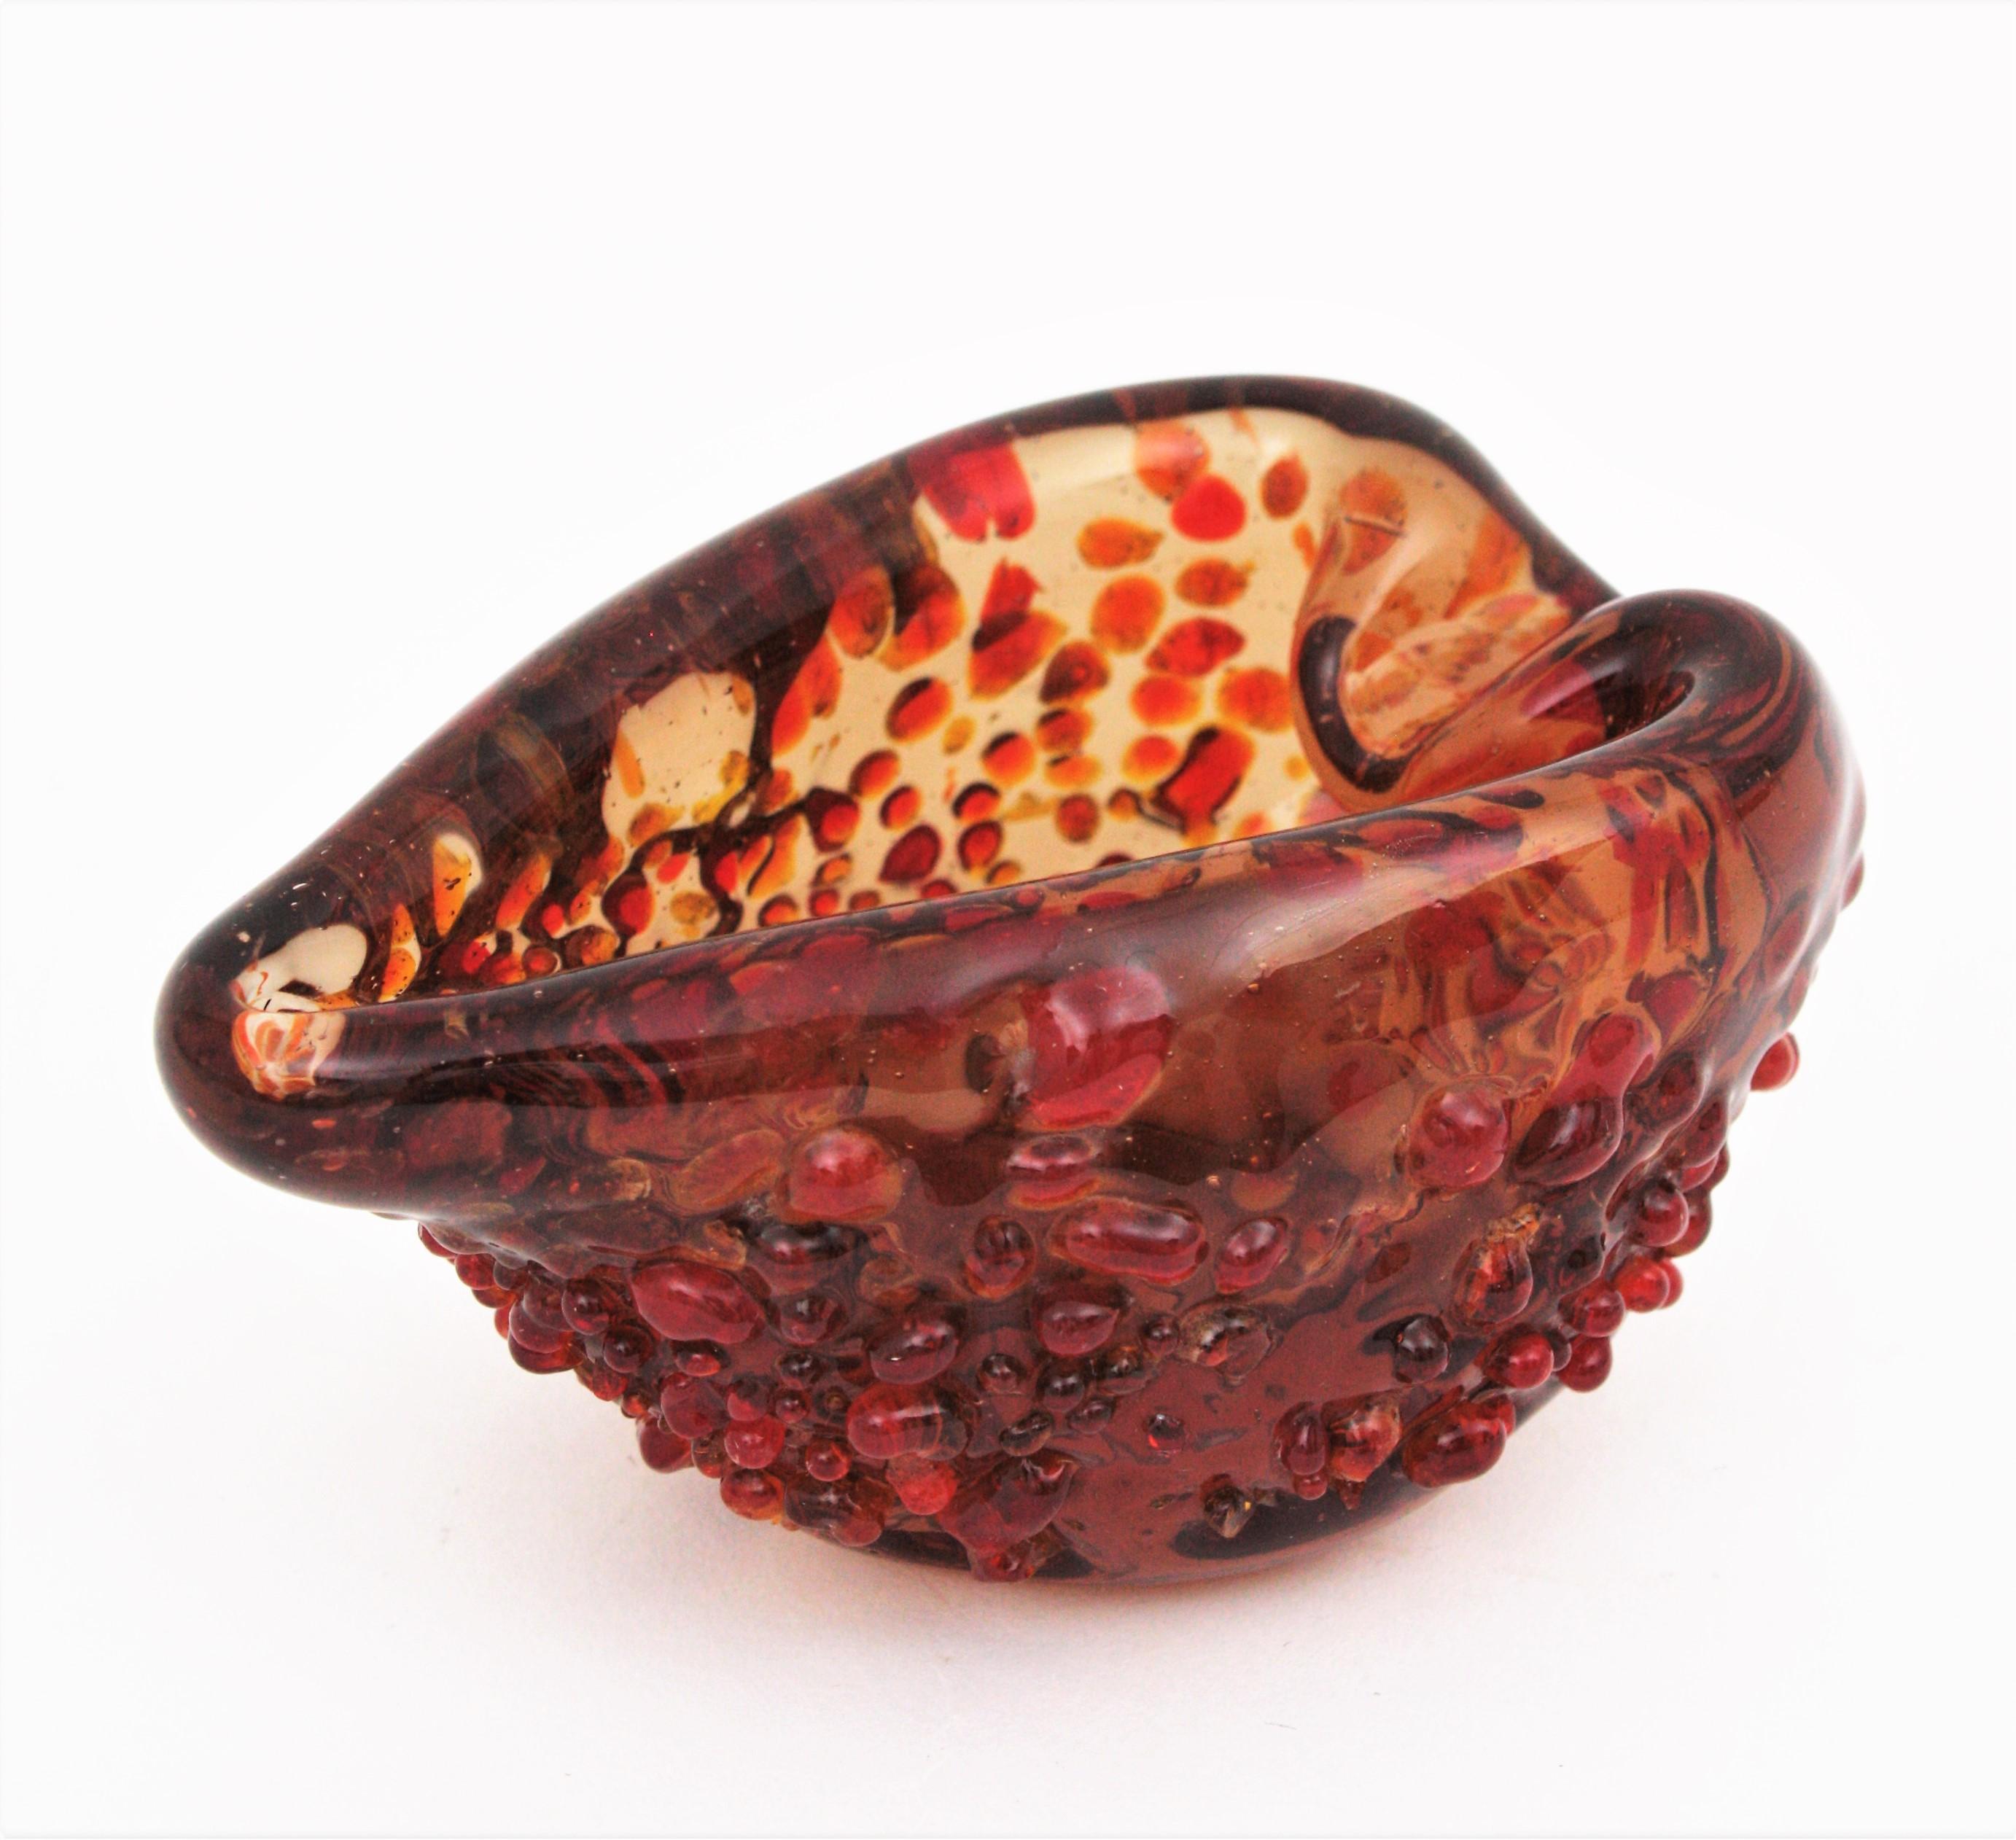 An amazing heart shaped hand blown amber / brown Murano glass bowl or ashtray with applied glass drops. Italy, 1950s.
Orange / burgundy / red glass drops applied on an amber-brown glass surface. Impressive under the sun light.
The piece is in